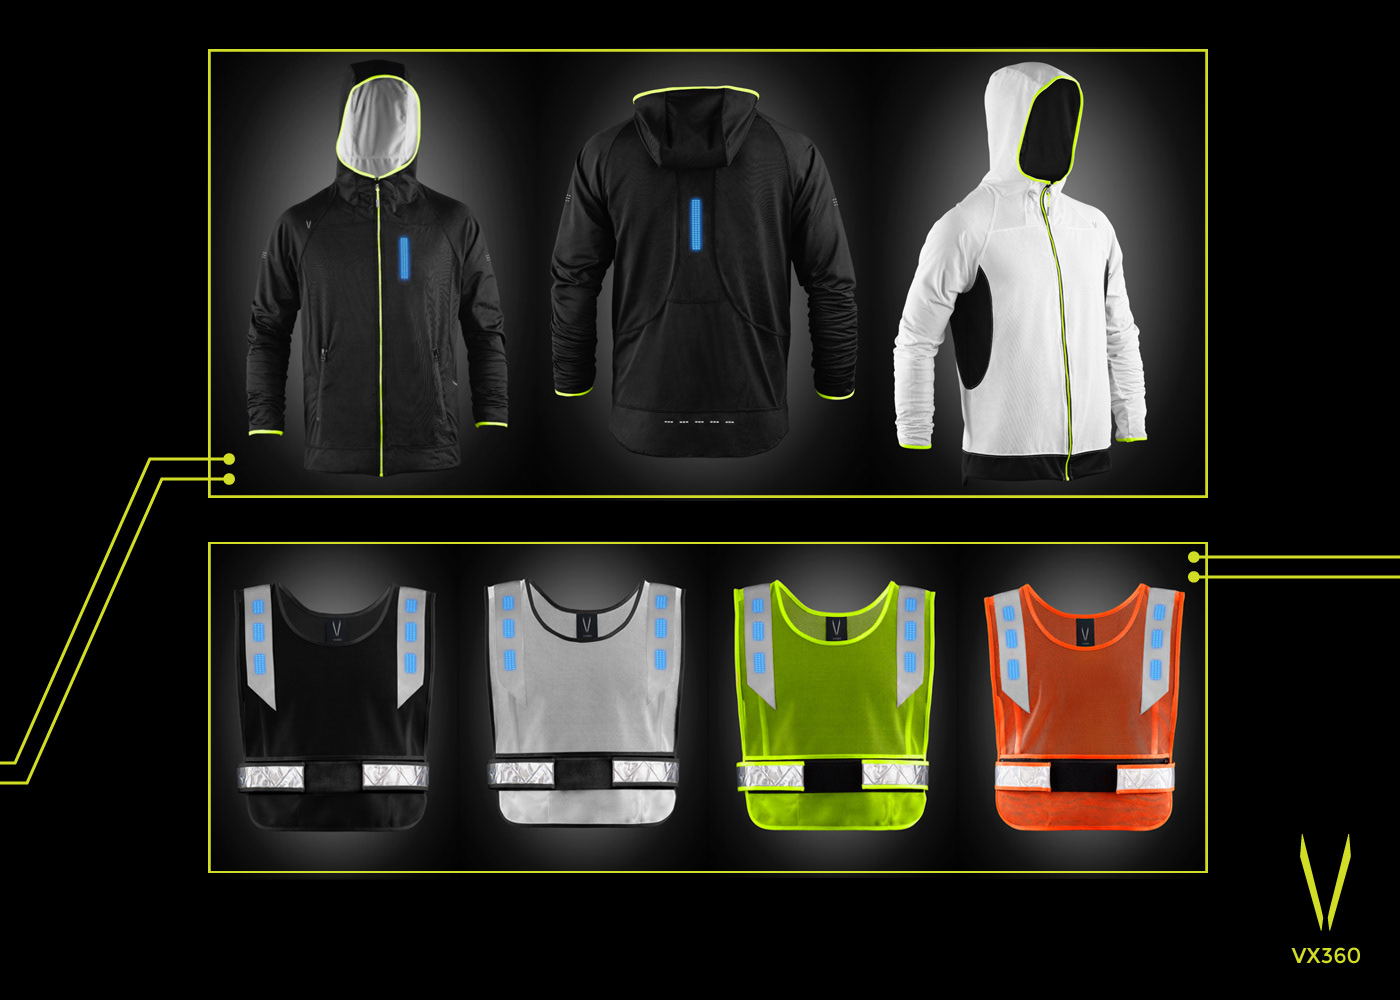 Athletic Gear electroluminescent Lit Accessories product design  product development Wearable Technology